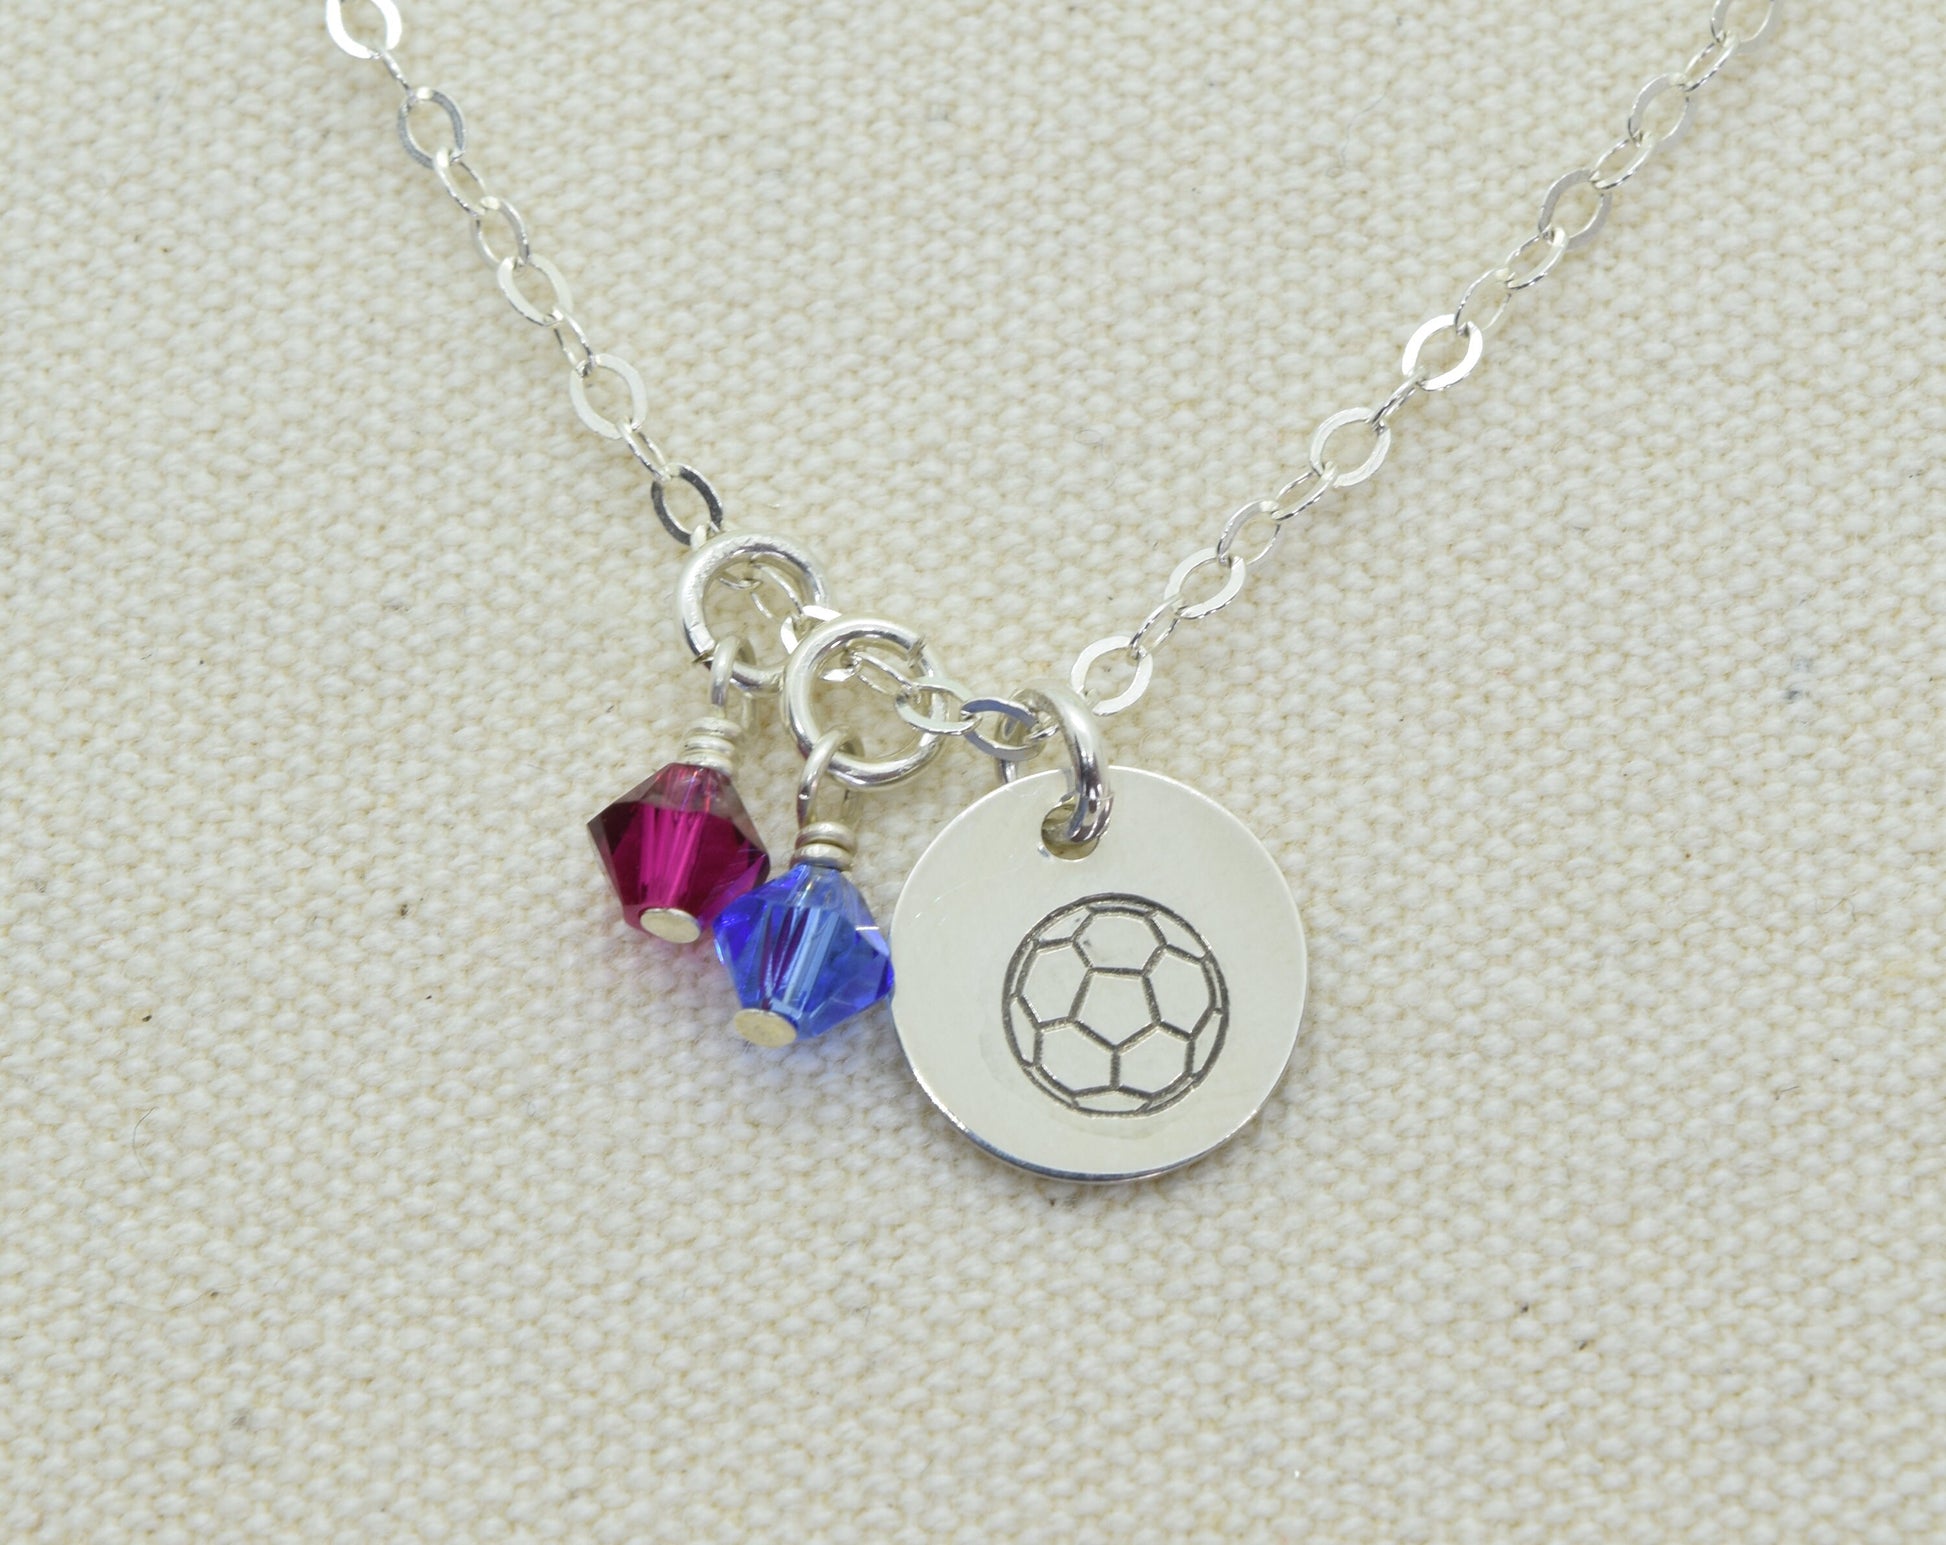 Sterling Silver Soccer Ball Charm Necklace, Soccerball Pendant, Sports Team Gift, Sports Mom Gift, Add Birthstone or Team Colors